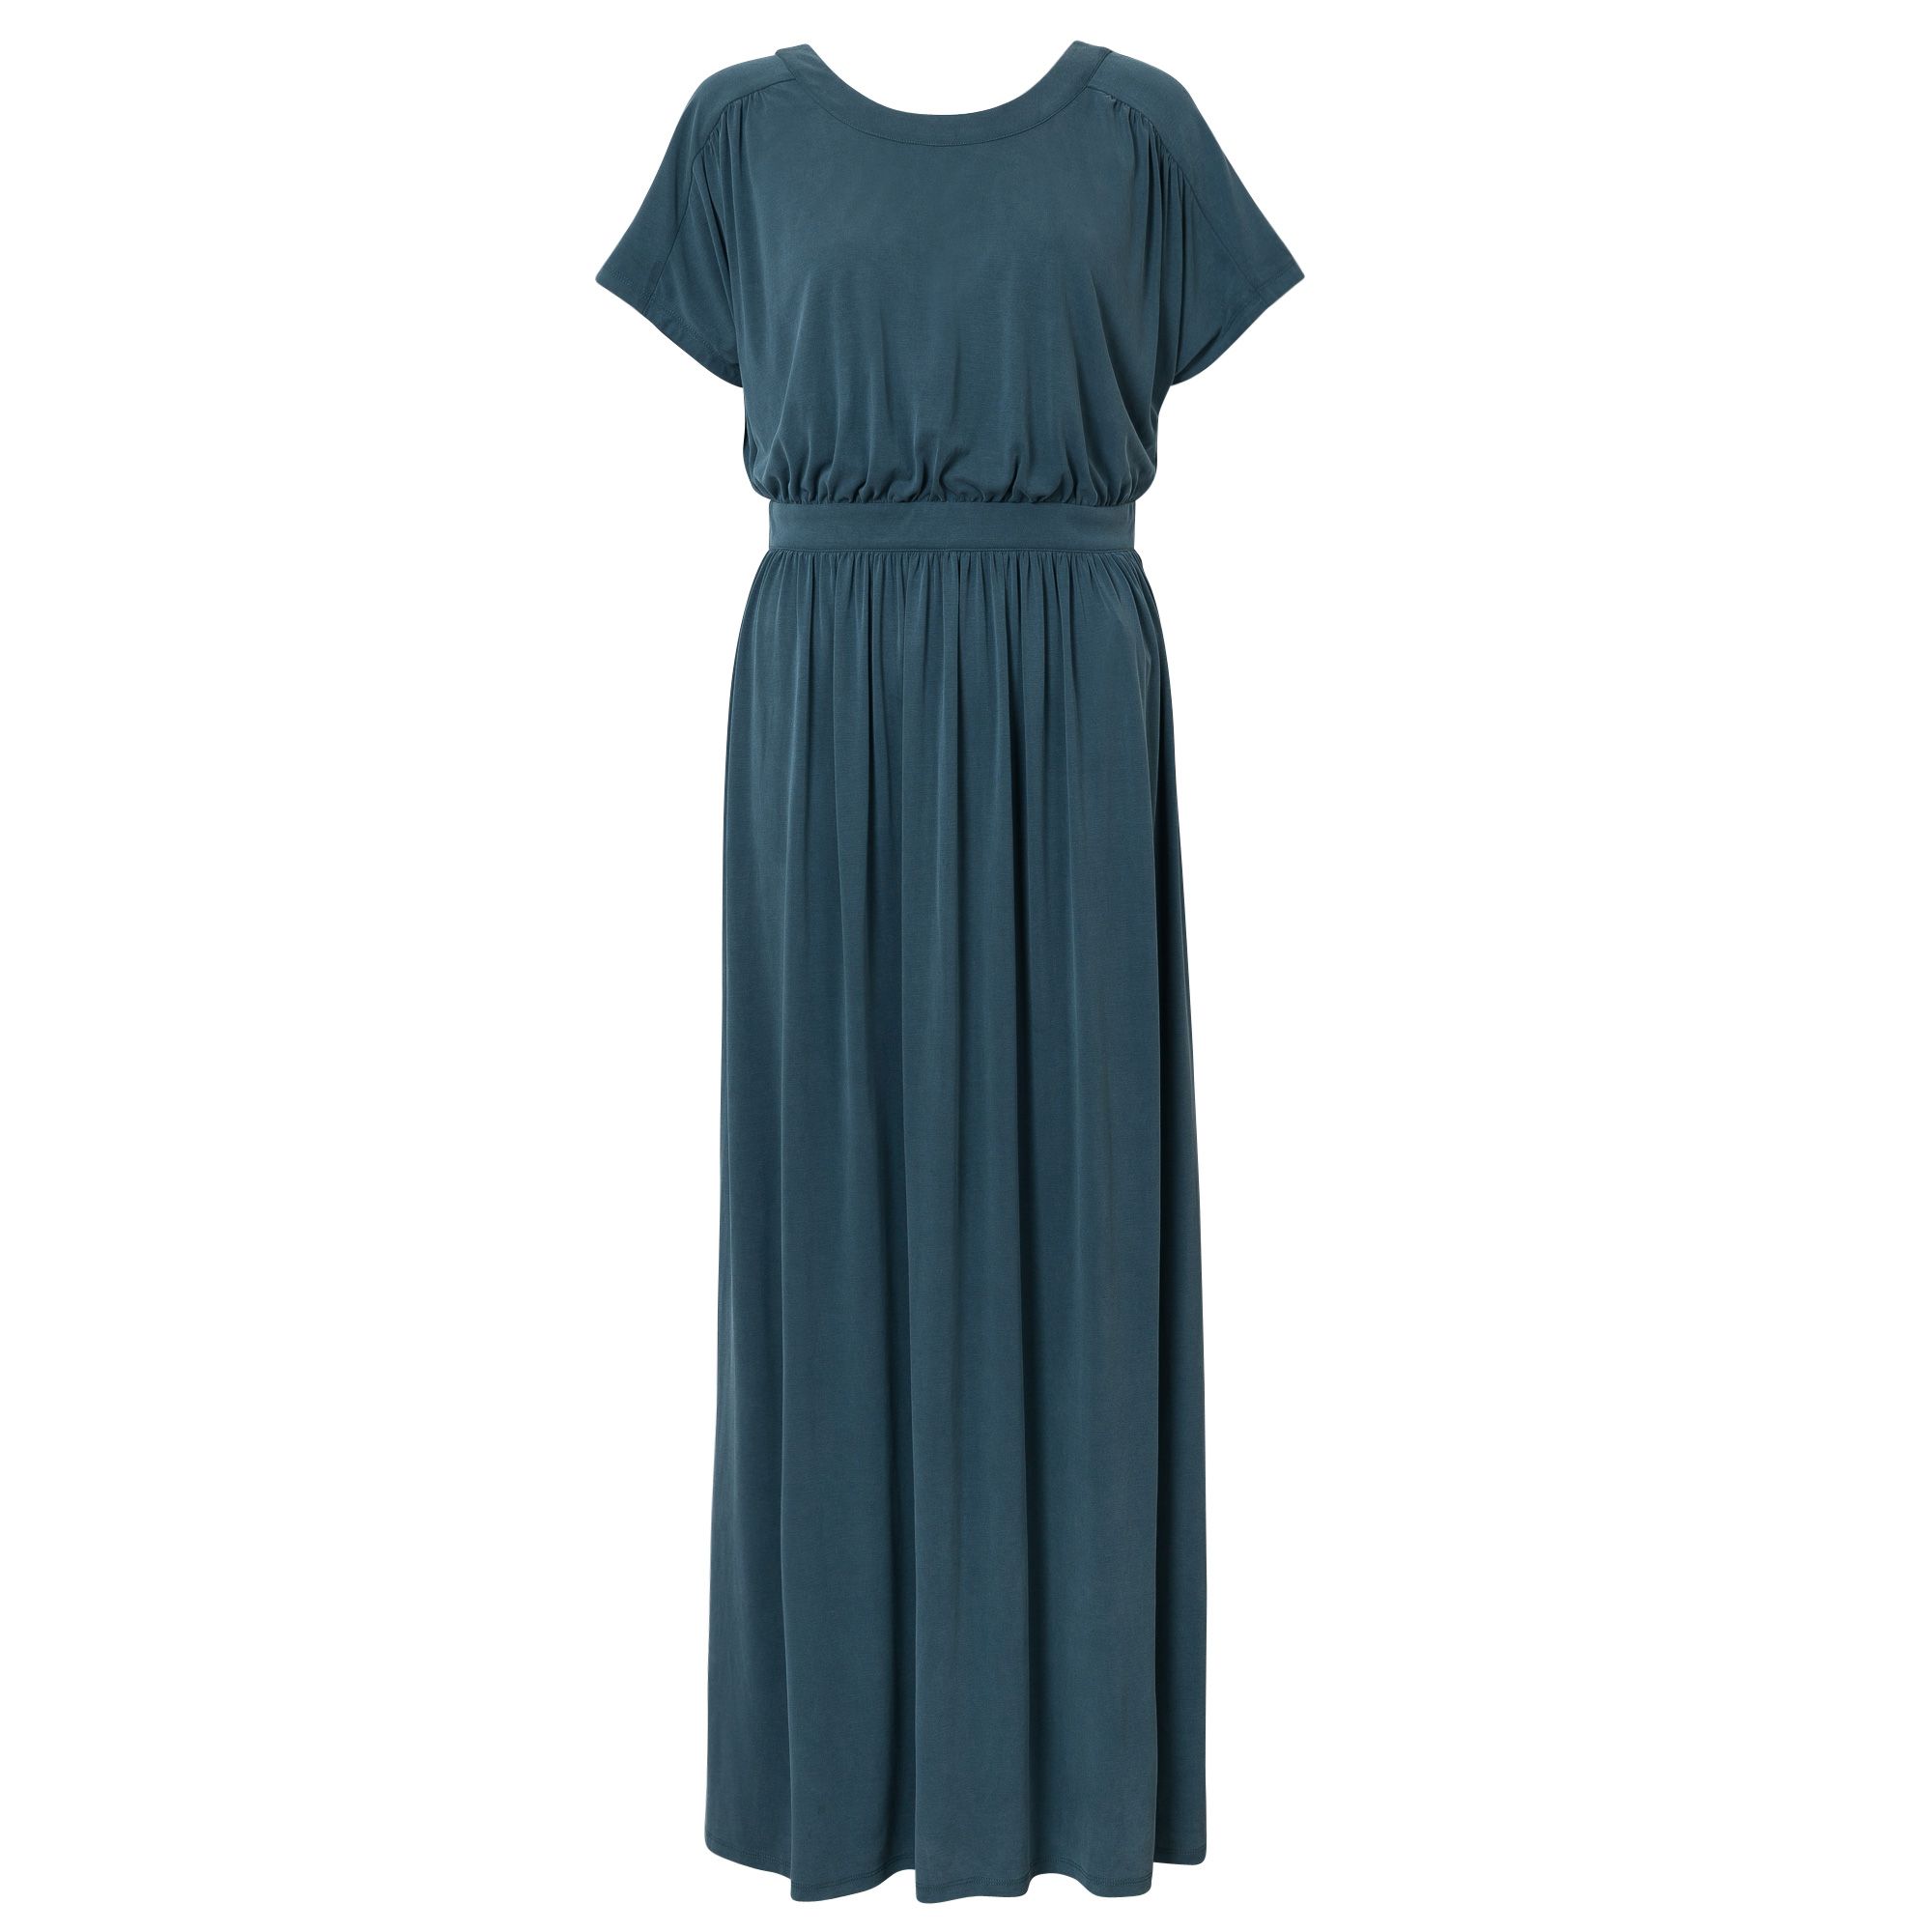 occasion dresses for winter wedding guests